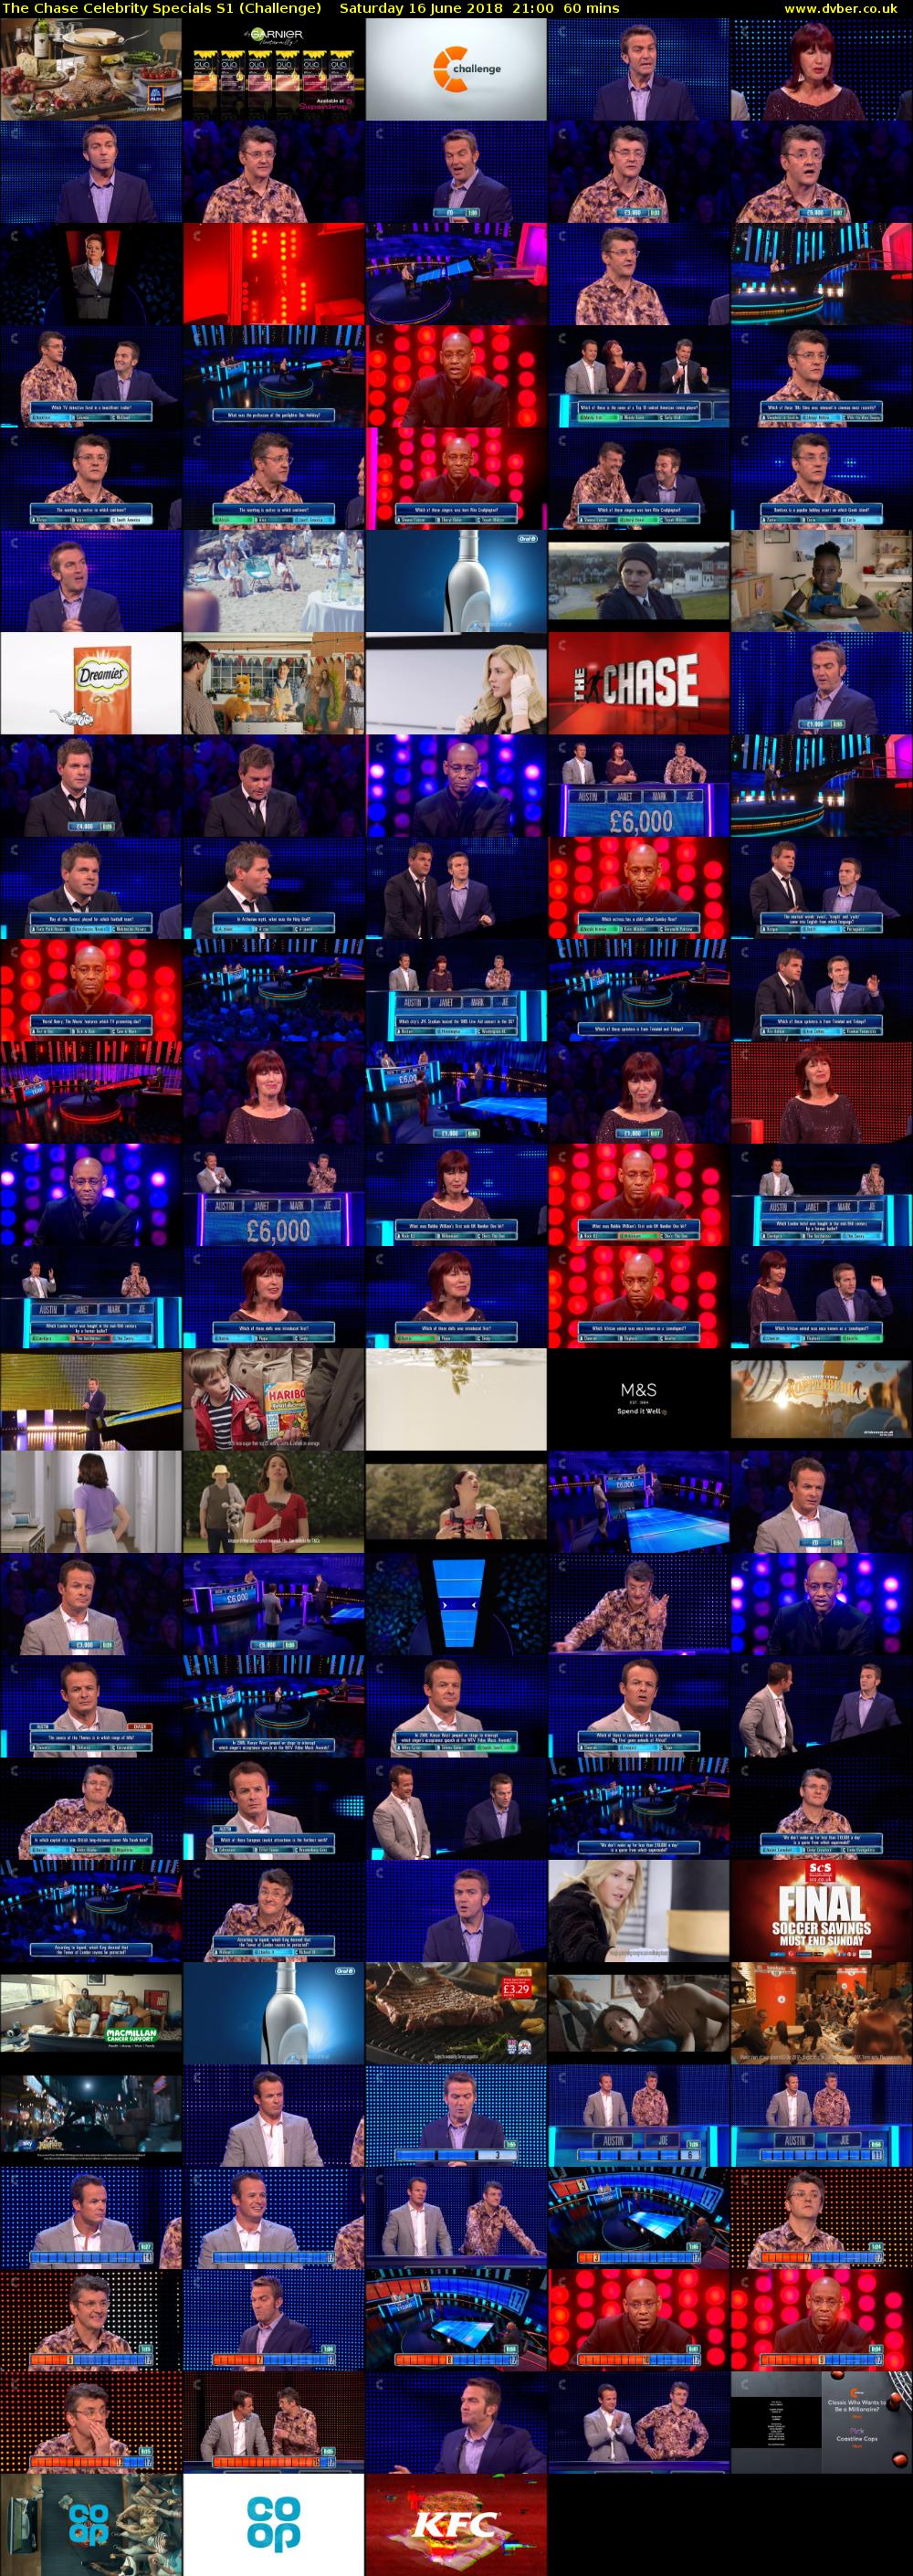 The Chase Celebrity Specials S1 (Challenge) Saturday 16 June 2018 21:00 - 22:00